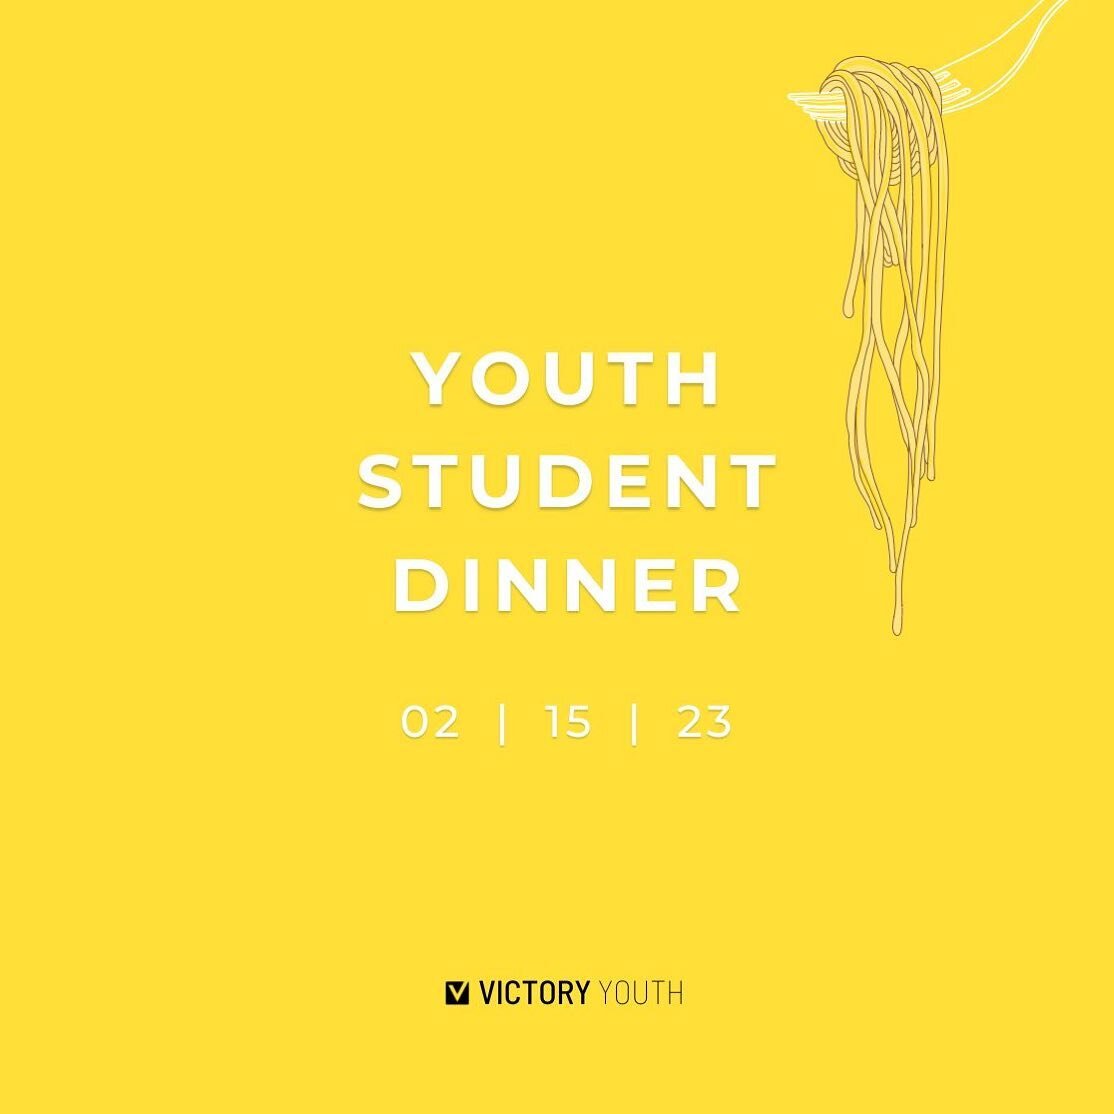 You&rsquo;re invited! Grab a plate of pasta with us tomorrow night at 7 PM. There is a seat at the table waiting for you. 🍝🍝🍝

It doesn&rsquo;t matter it you have attended Victory youth before, we would love for you to be our guest. Any and all st